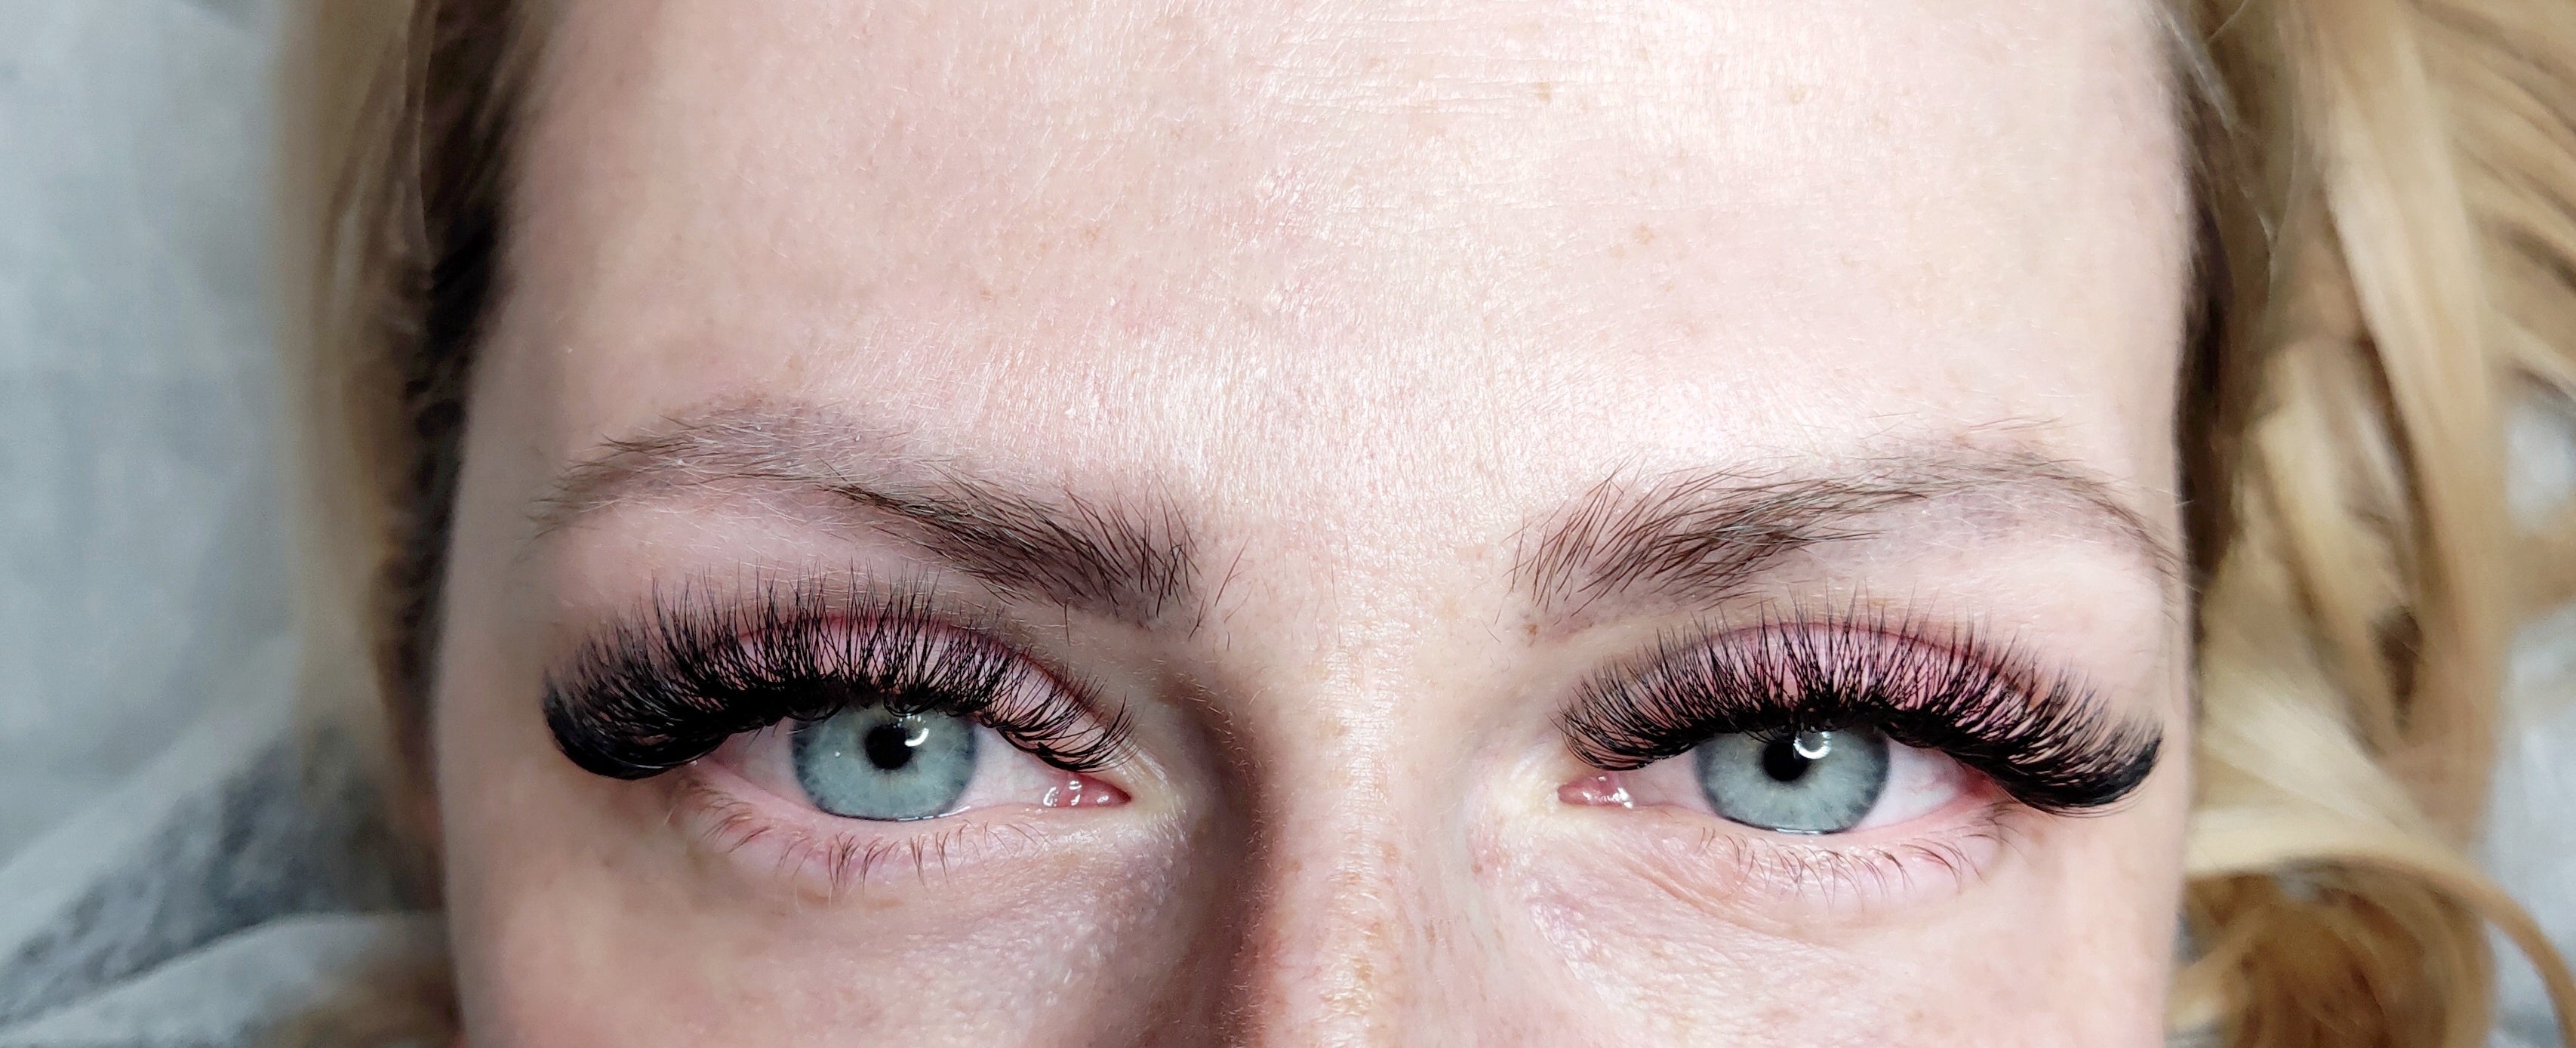 A look at the long-term effects of microblading eyebrows [Overview]